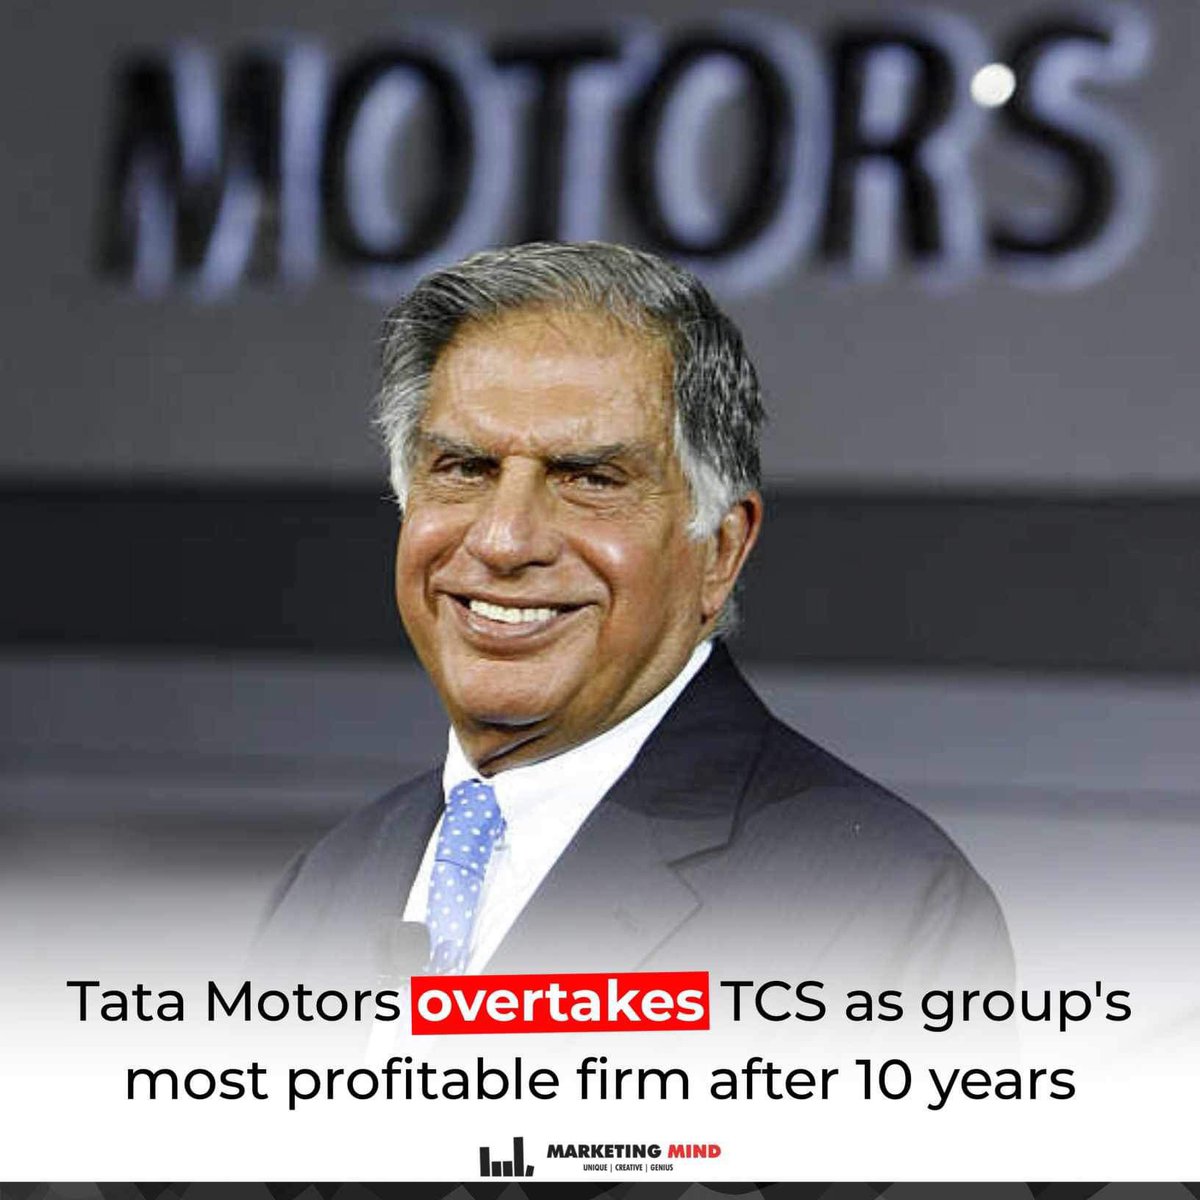 Tata Motors reported a consolidated net profit of Rs 17,483 crore (adjusted for exceptional gains and losses) for Q4FY24, surpassing TCS’ consolidated net earnings of Rs 12,434 crore.

#MarketingMind #TataMotors #TCS #WhatsBuzzing